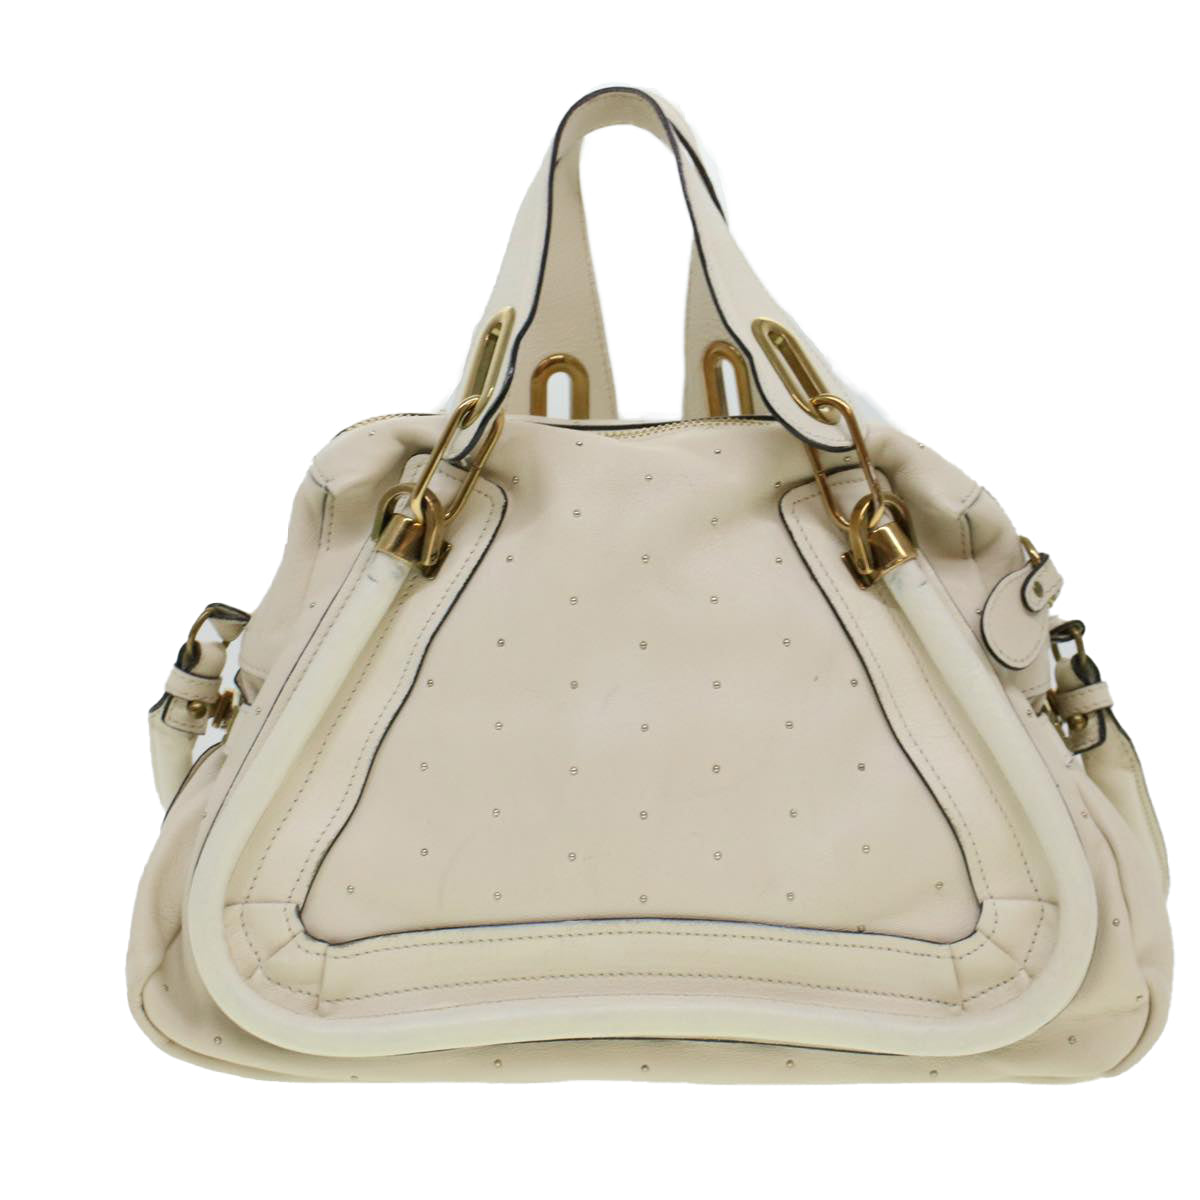 Chloe Paraty Hand Bag Leather 2way White 04-11-50 Auth 44037 - 0